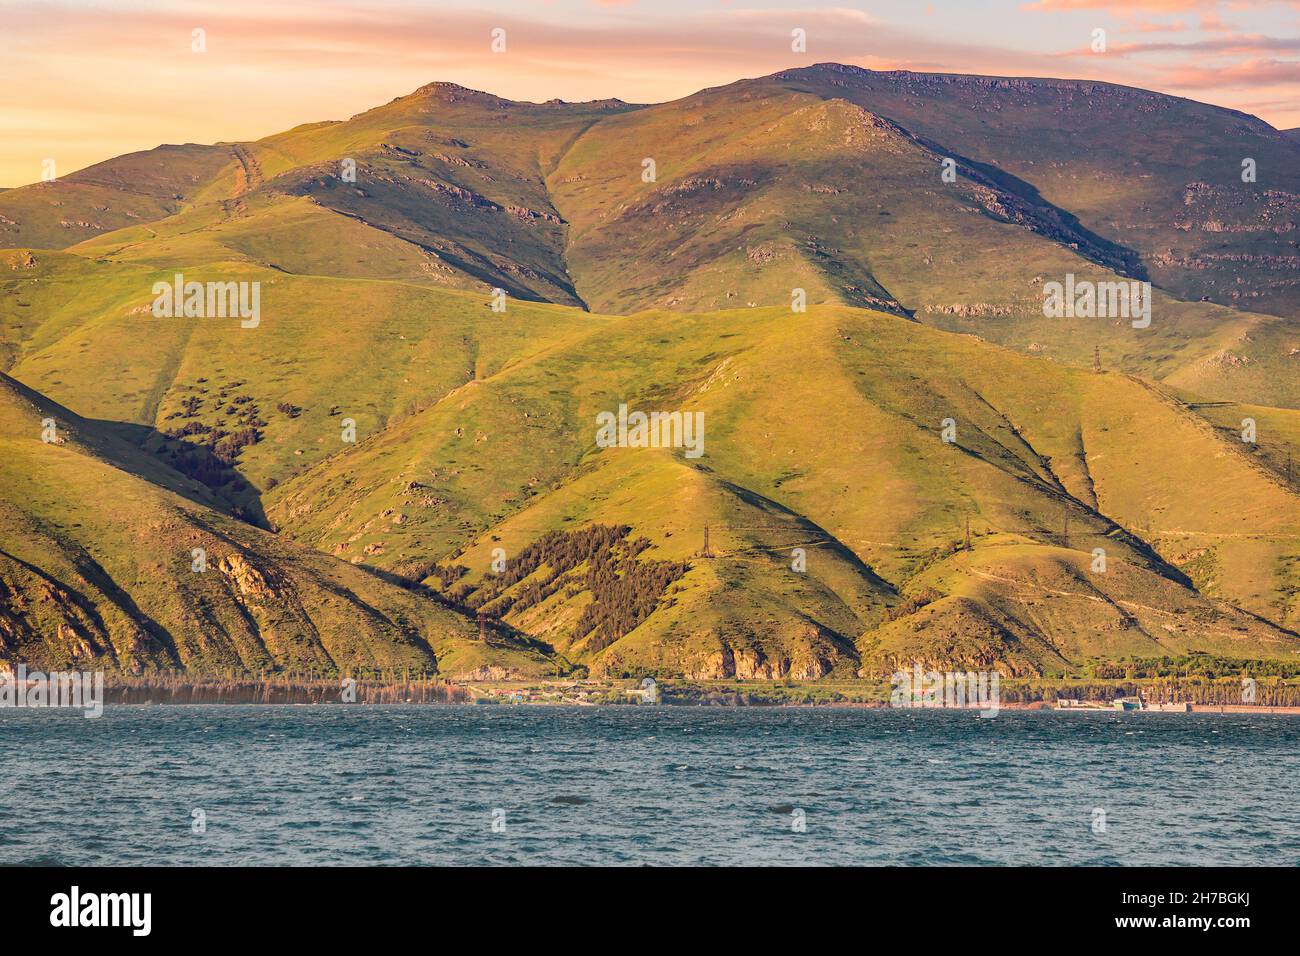 Sevan lake with bald mountain ranges. Dramatic and harsh northern landscape. Tourist attractions and ecology Stock Photo